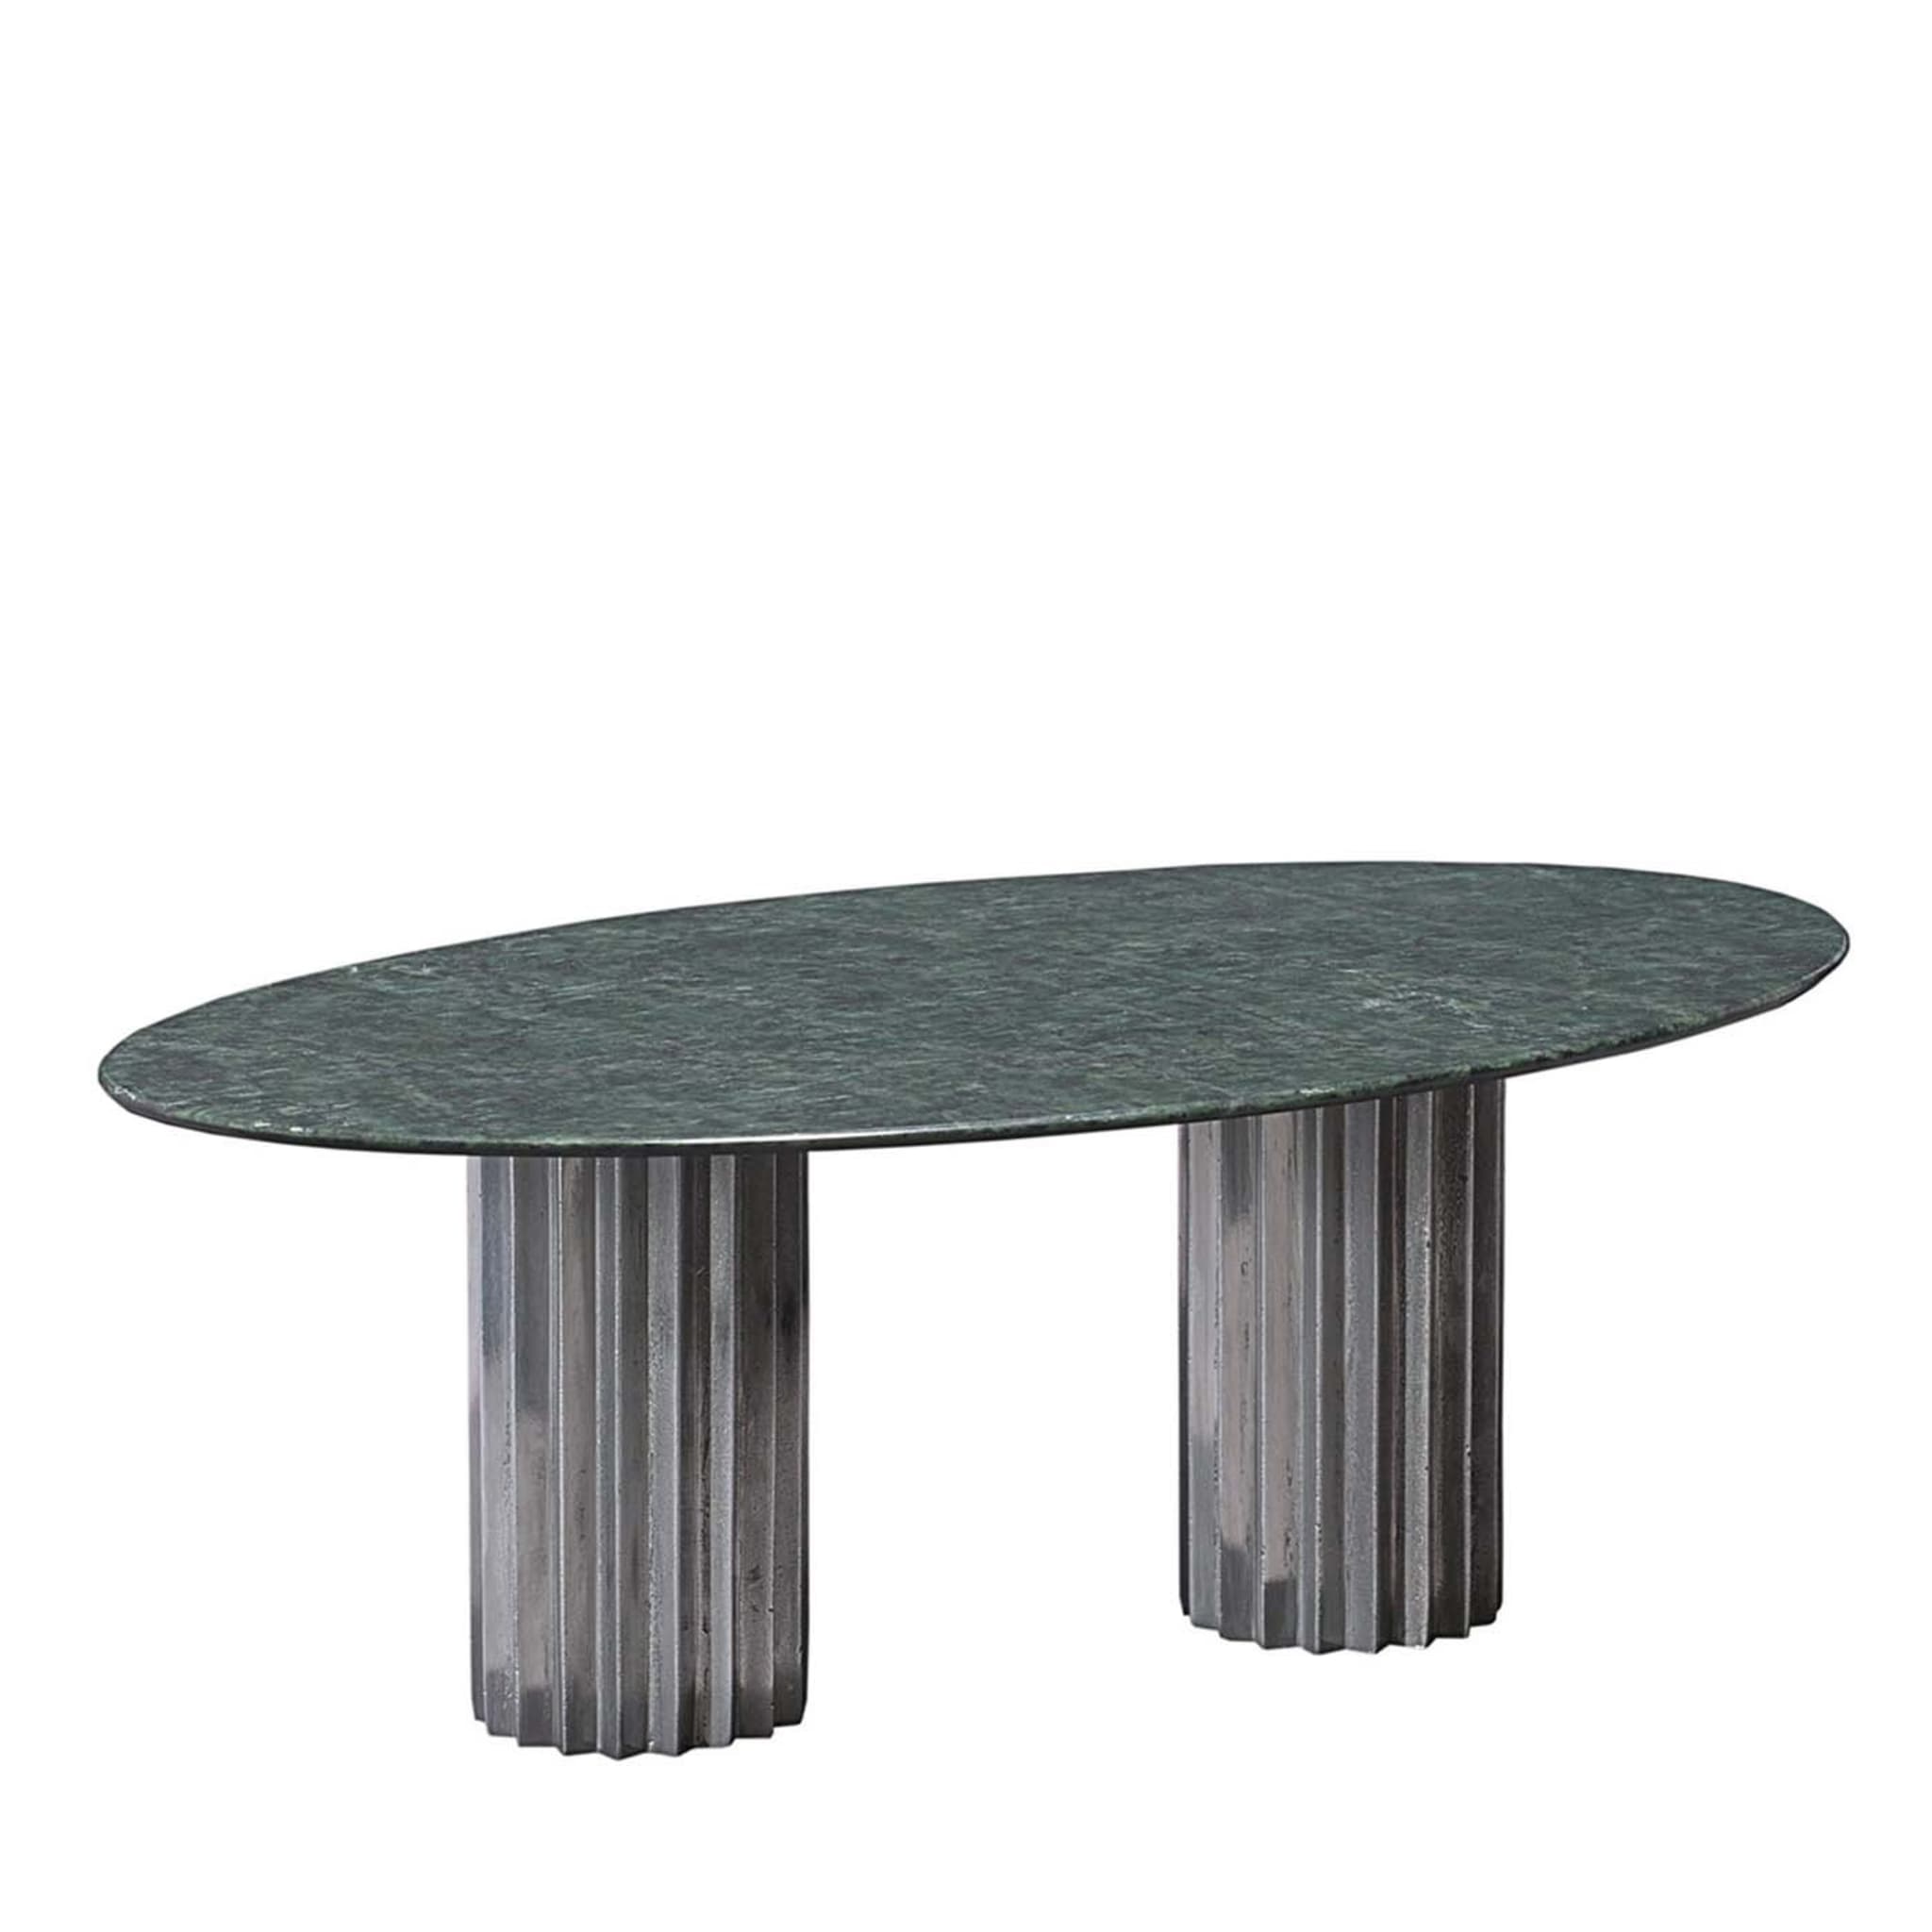 Doris Oval Dining Table in Green Marble and Aluminum - Main view